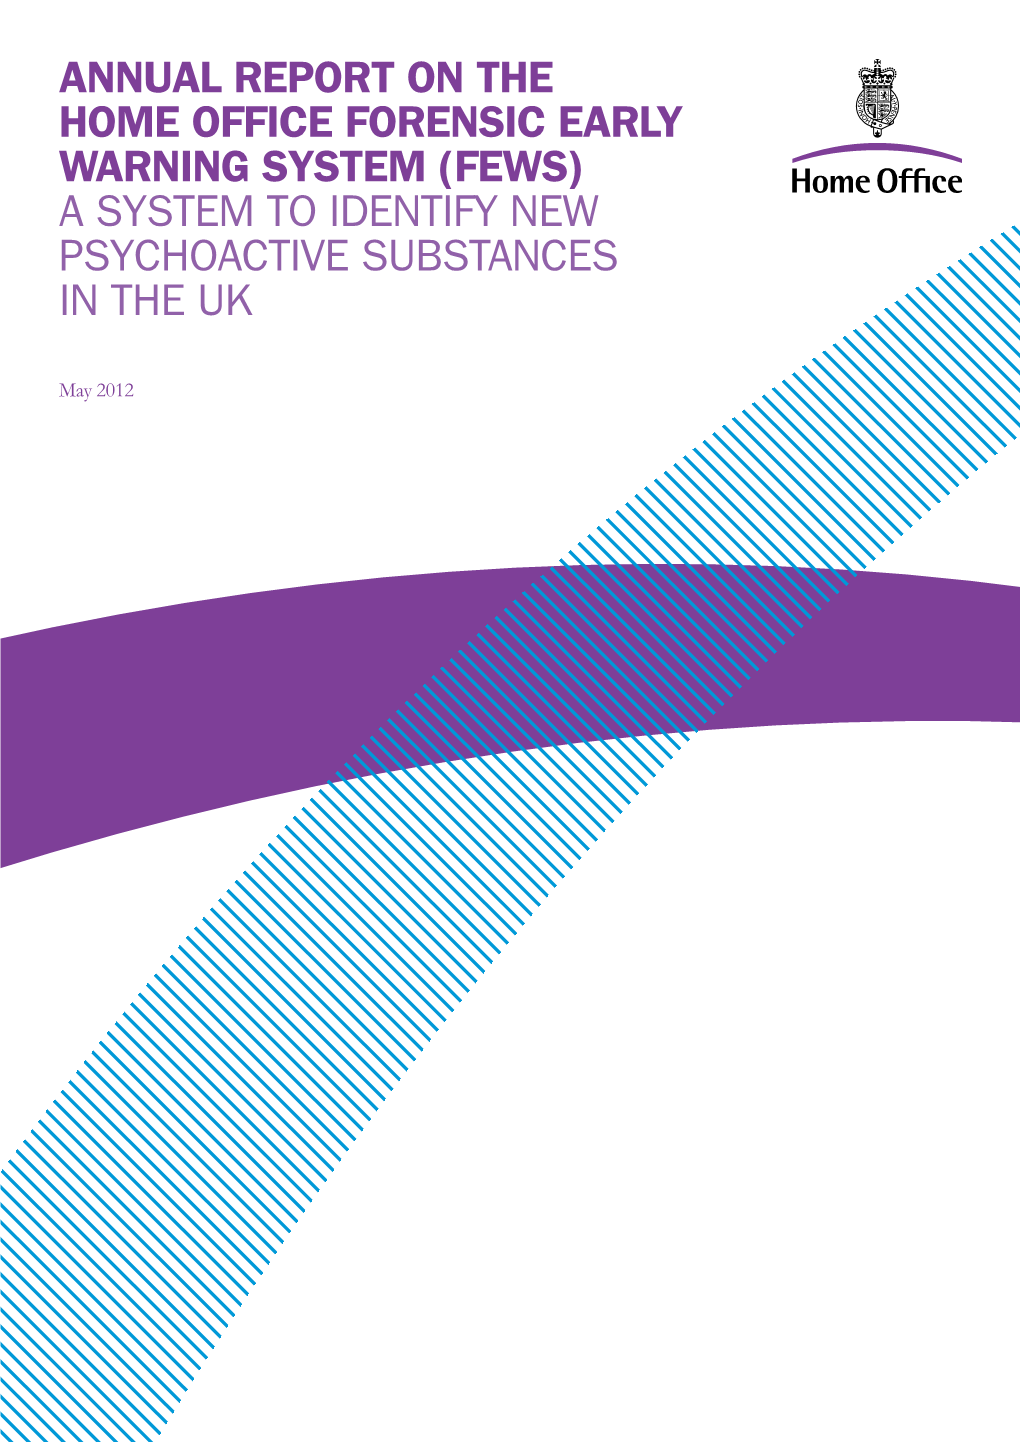 Fews) a System to Identify New Psychoactive Substances in the Uk